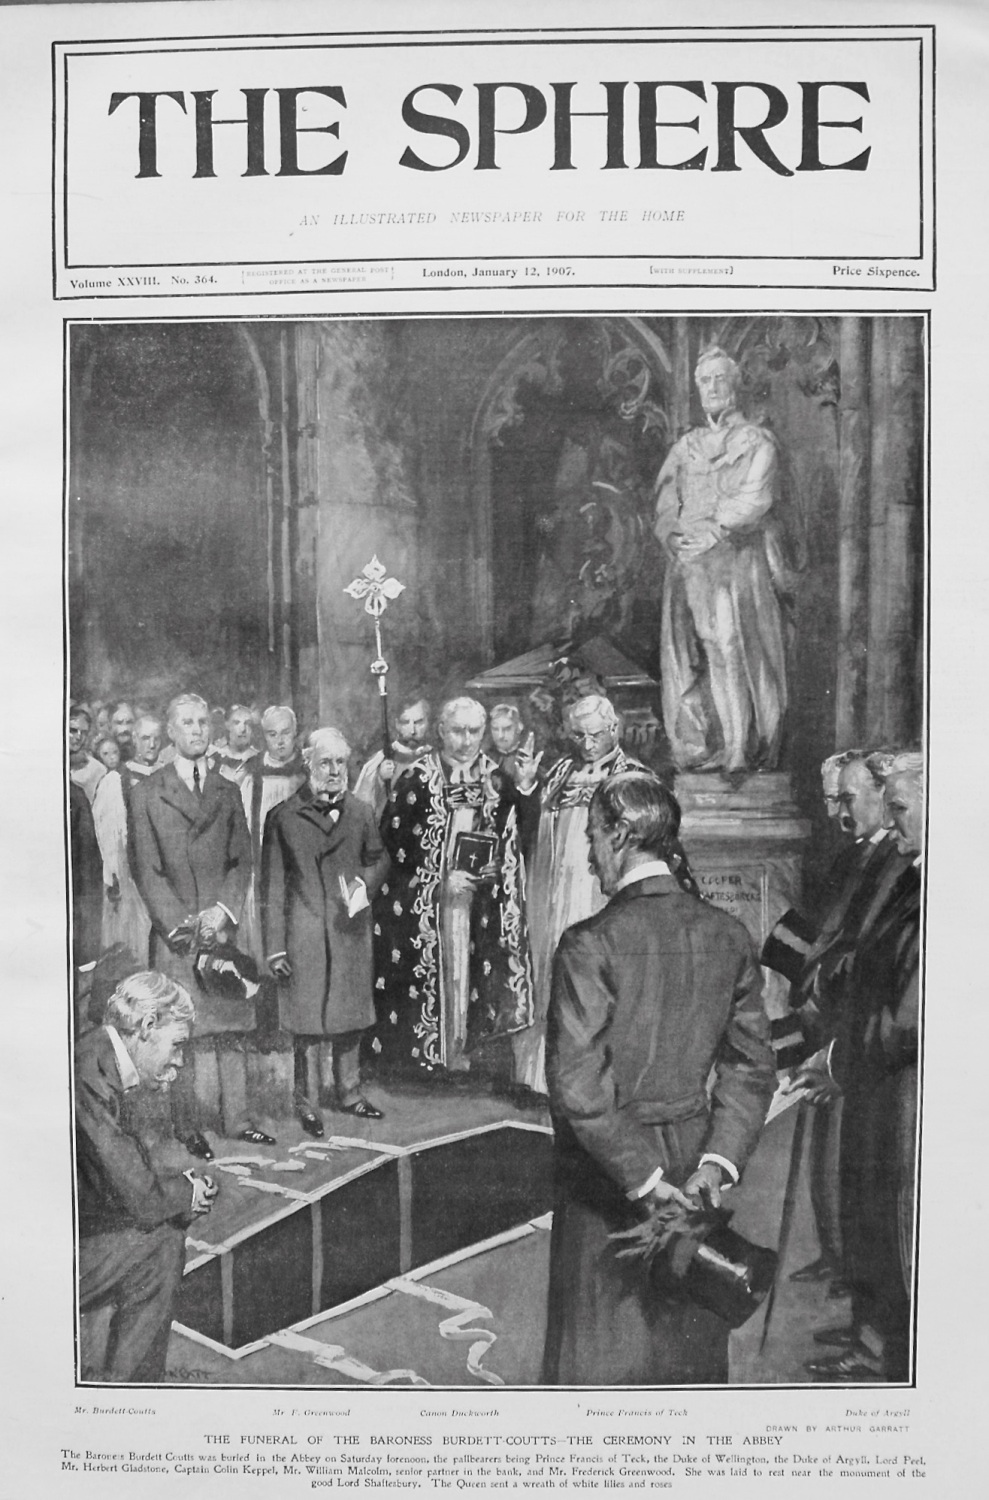 Funeral of the Baroness Burdett-Coutts - The Ceremony in the Abbey. 1907